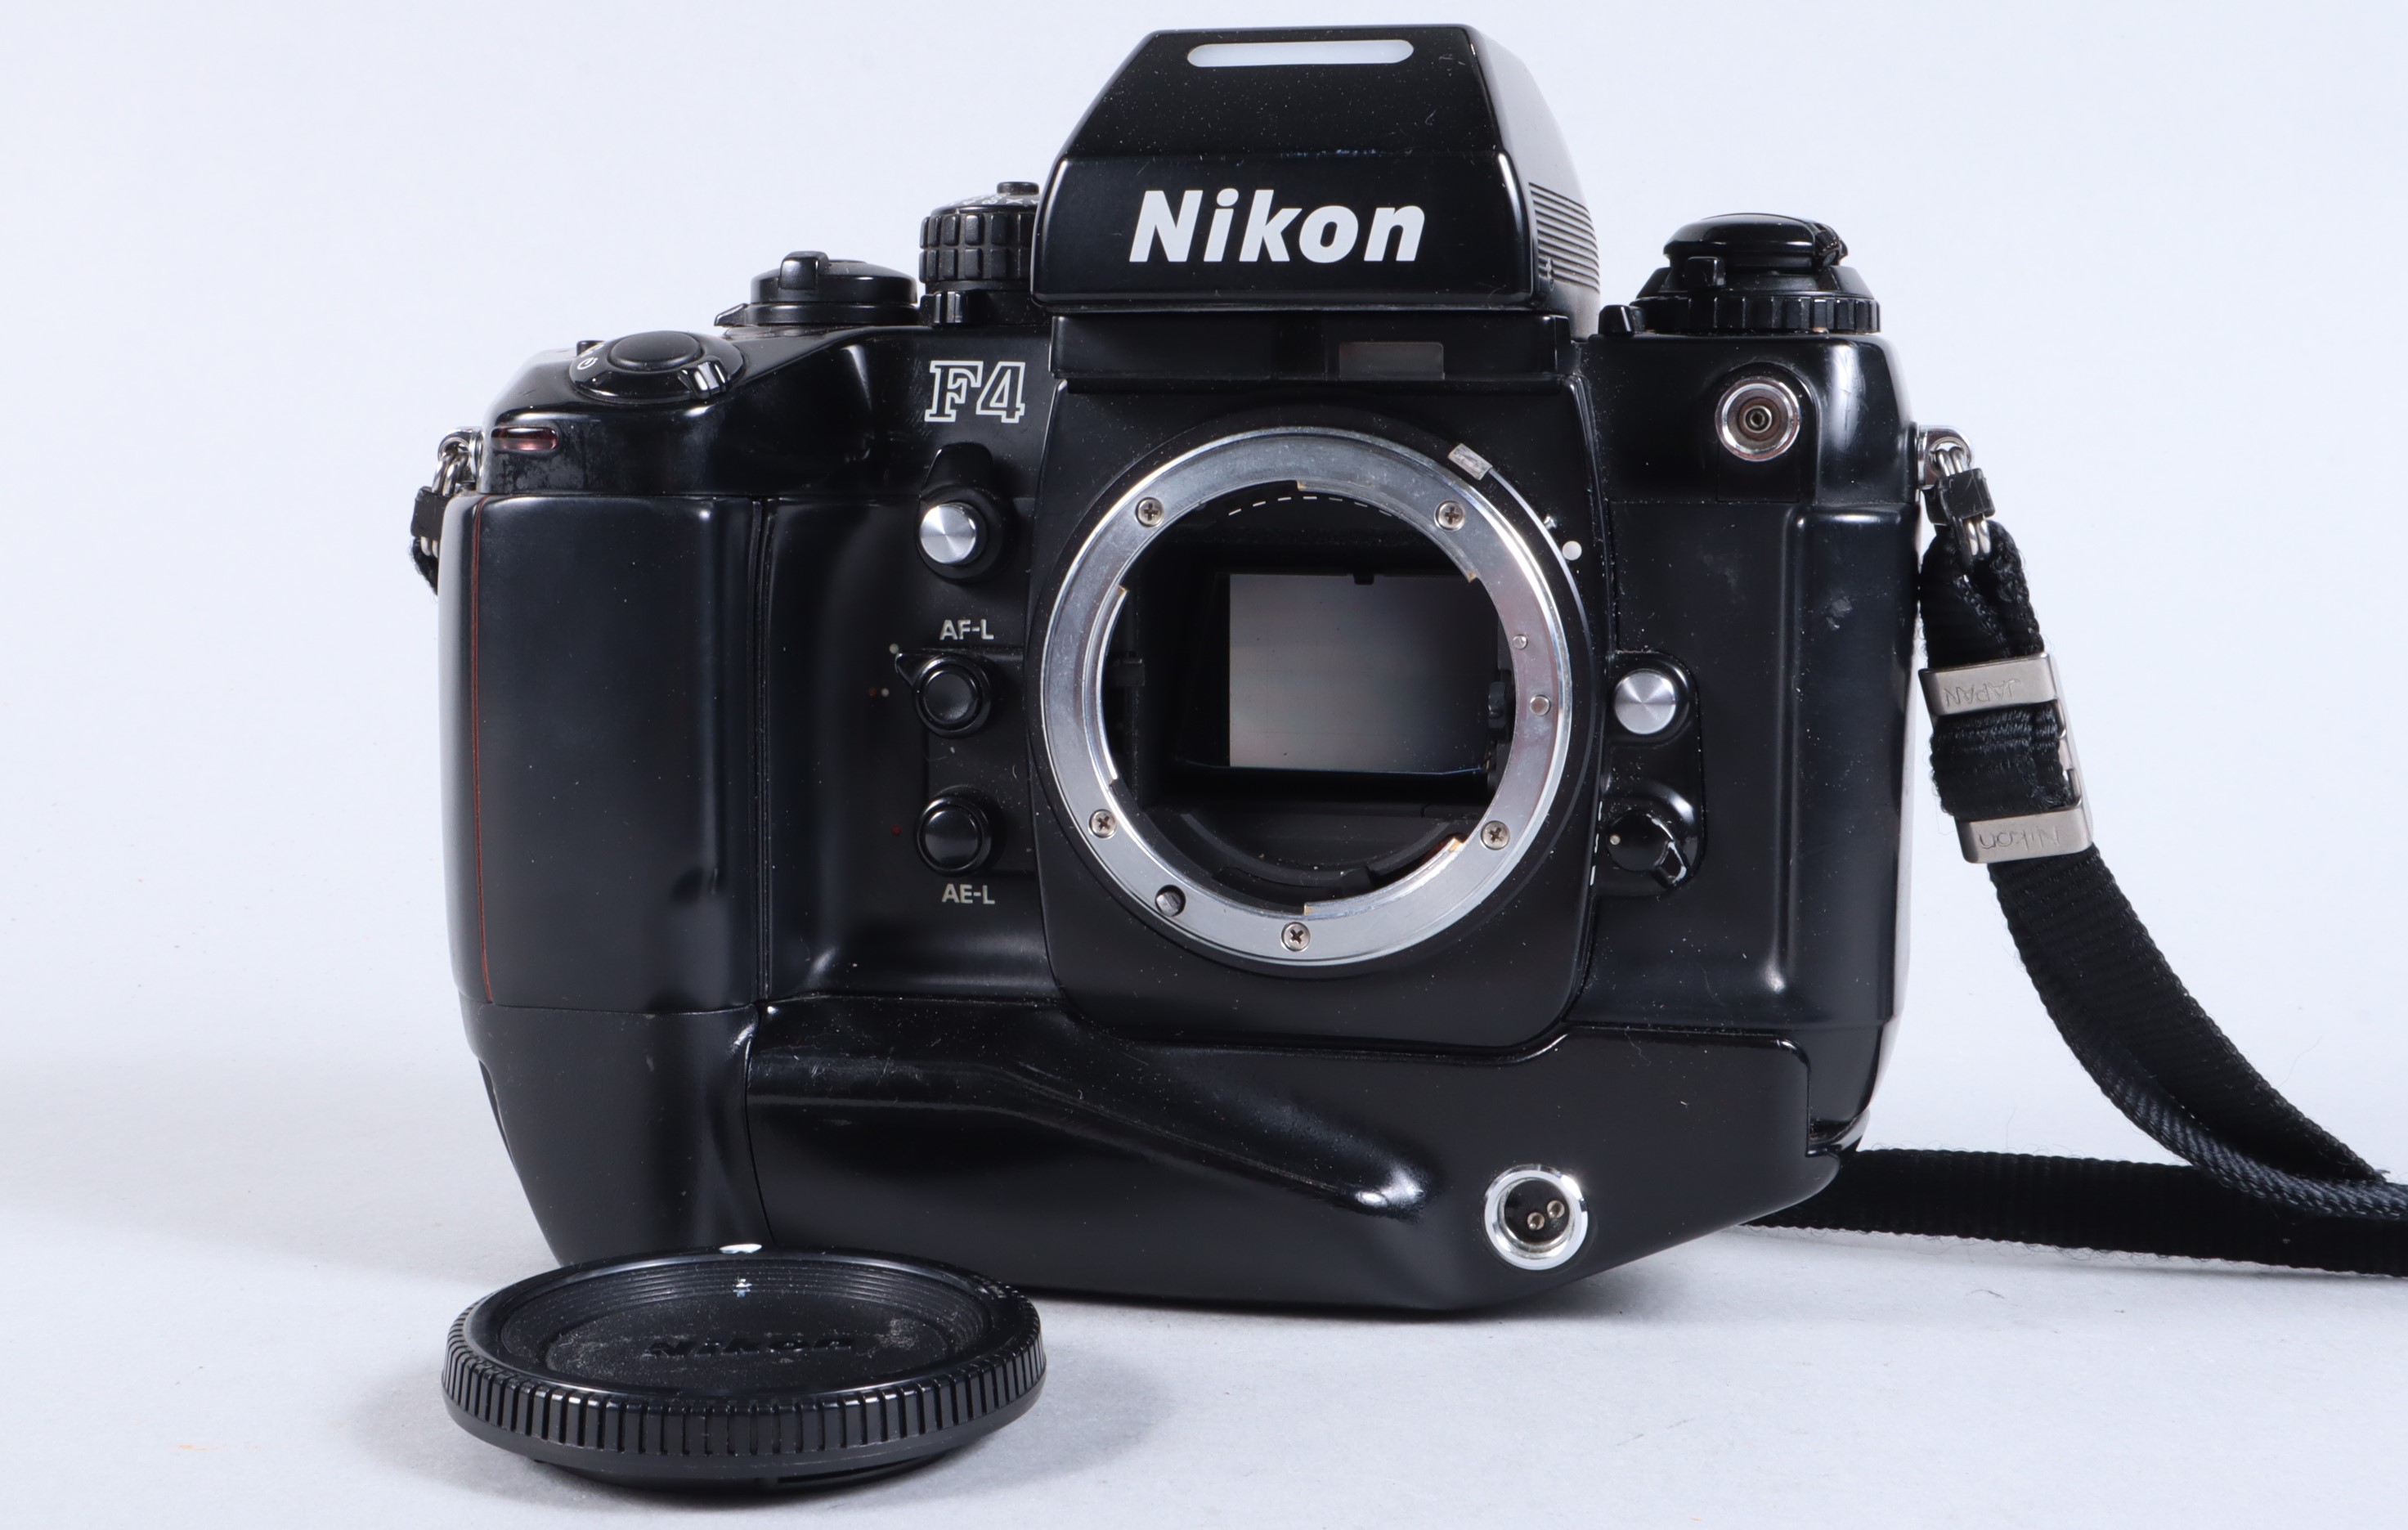 A Nikon F4 Camera Body, serial no 2258779, powers up, appears to function as should, shutter